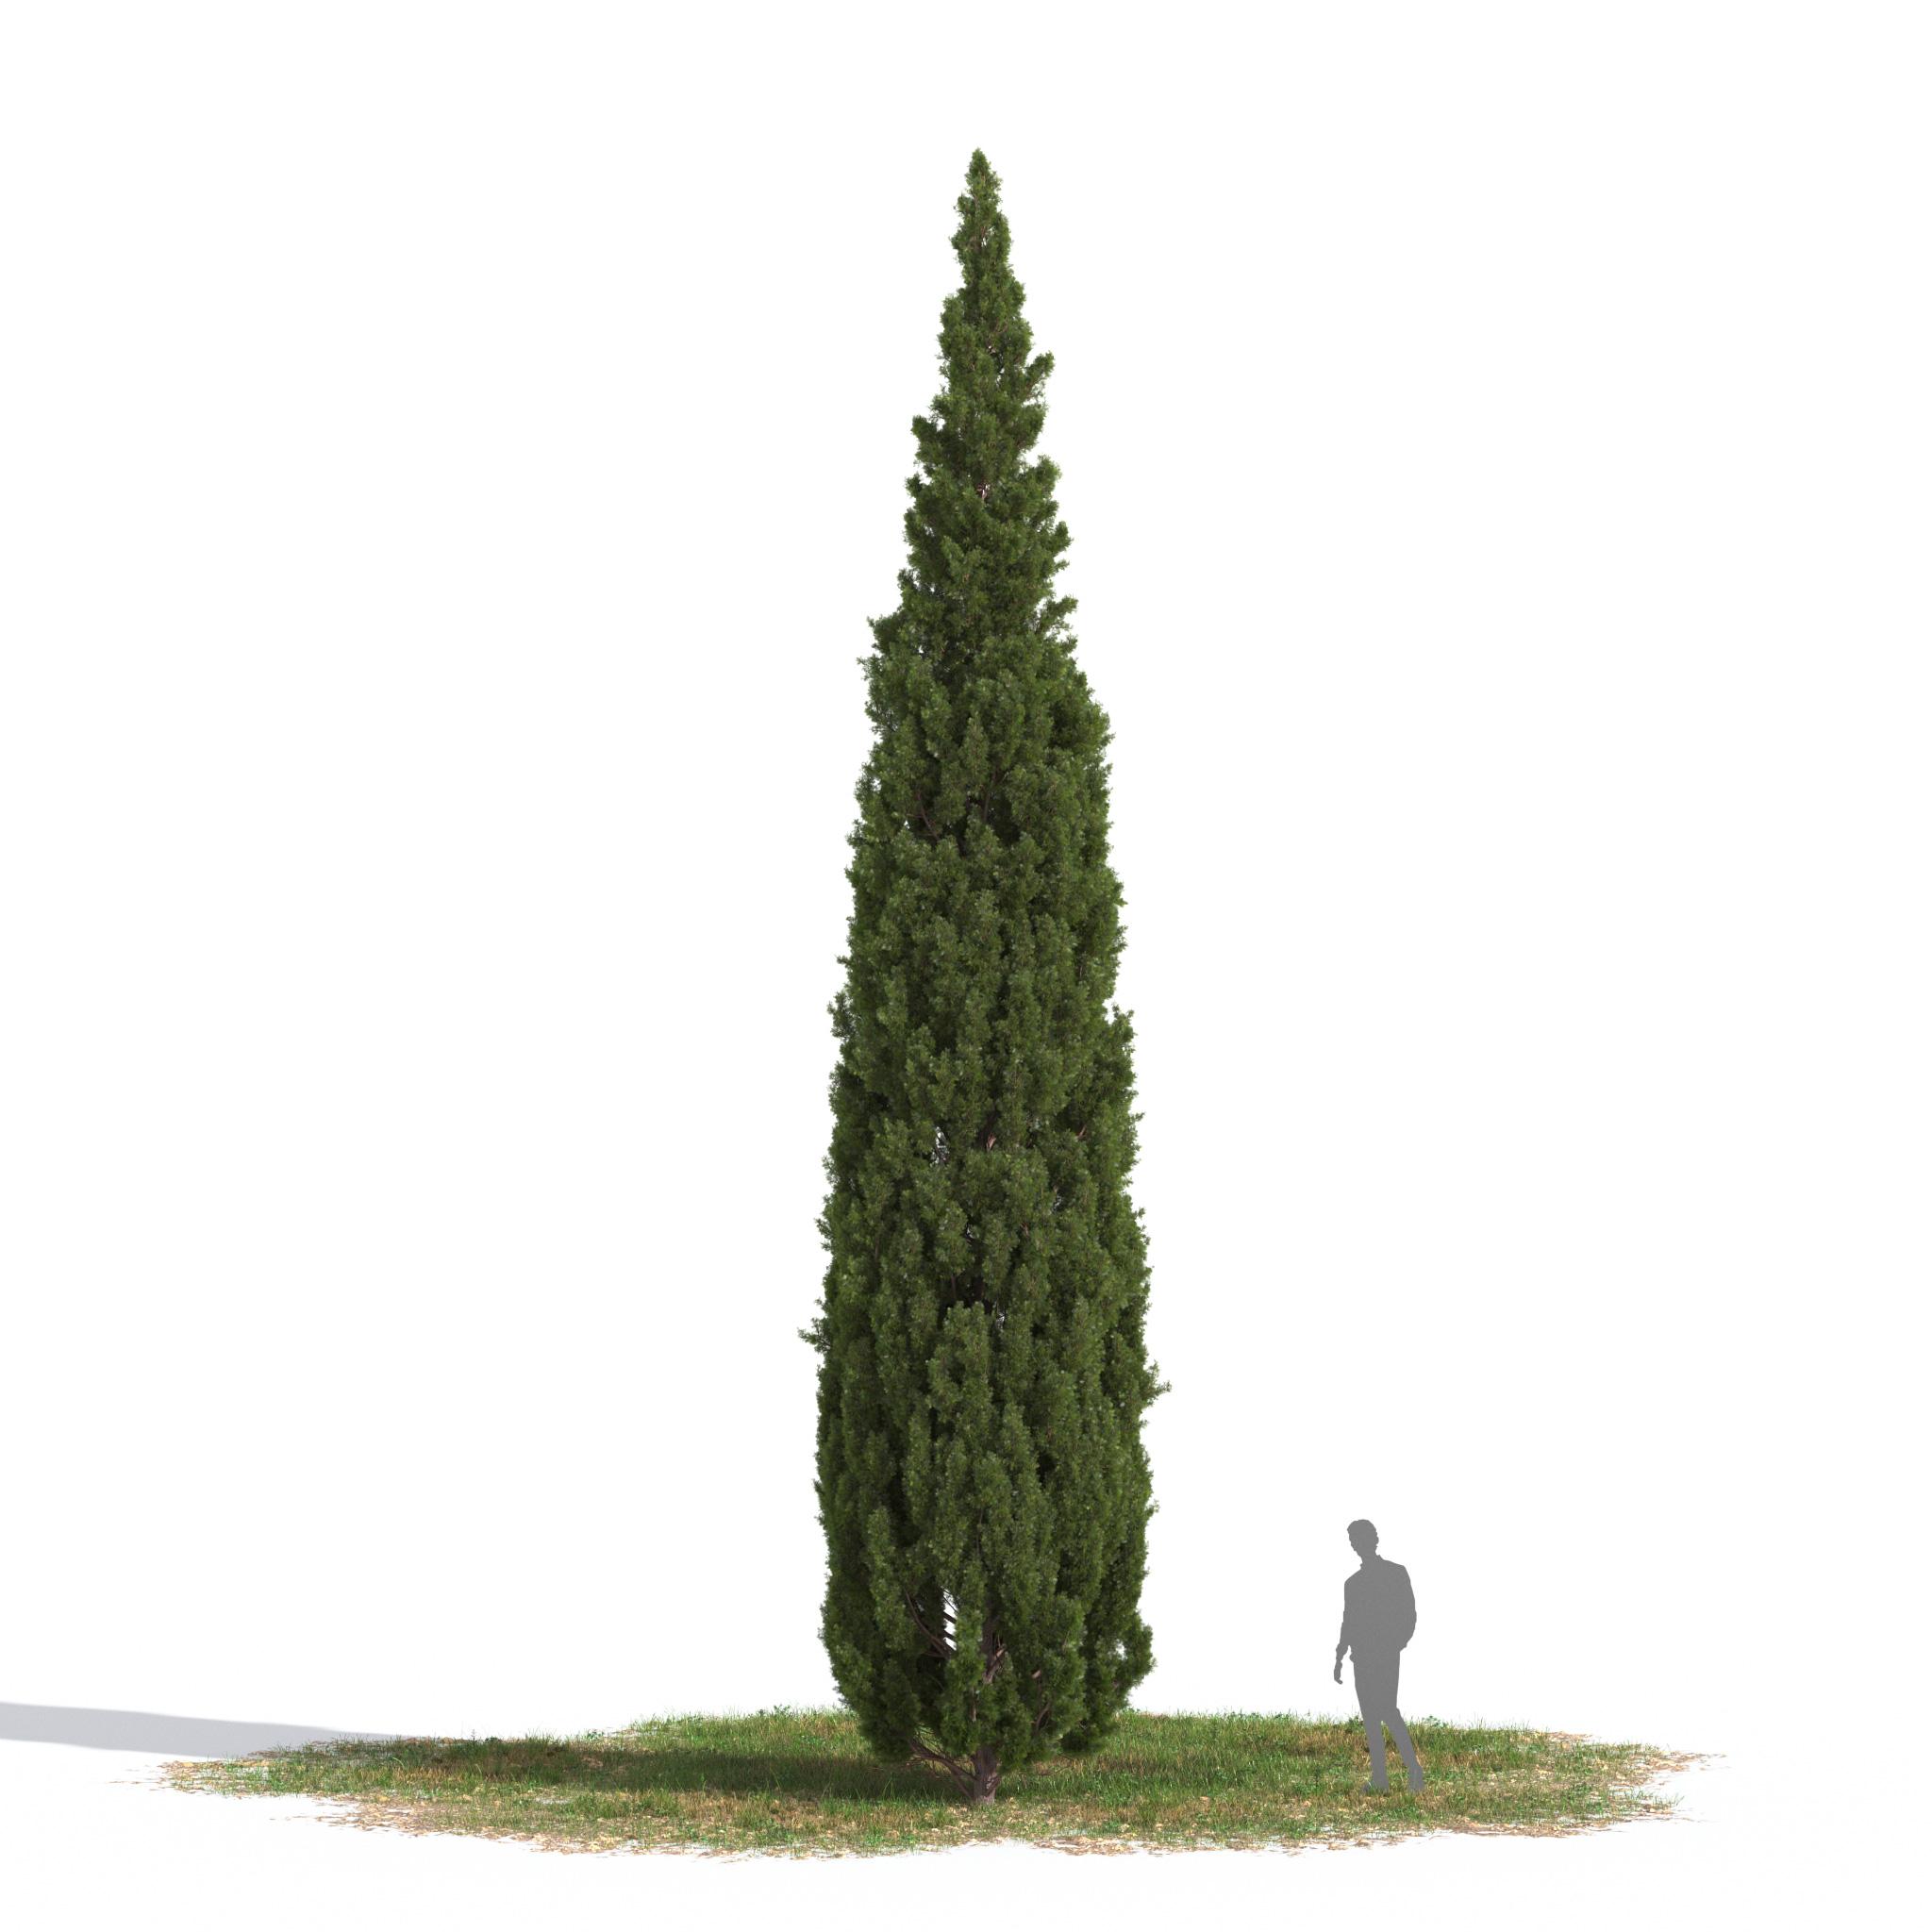 https://evermotion.org/files/model_images/AM269_001_Cupressus_serpenvirens_1.jpg